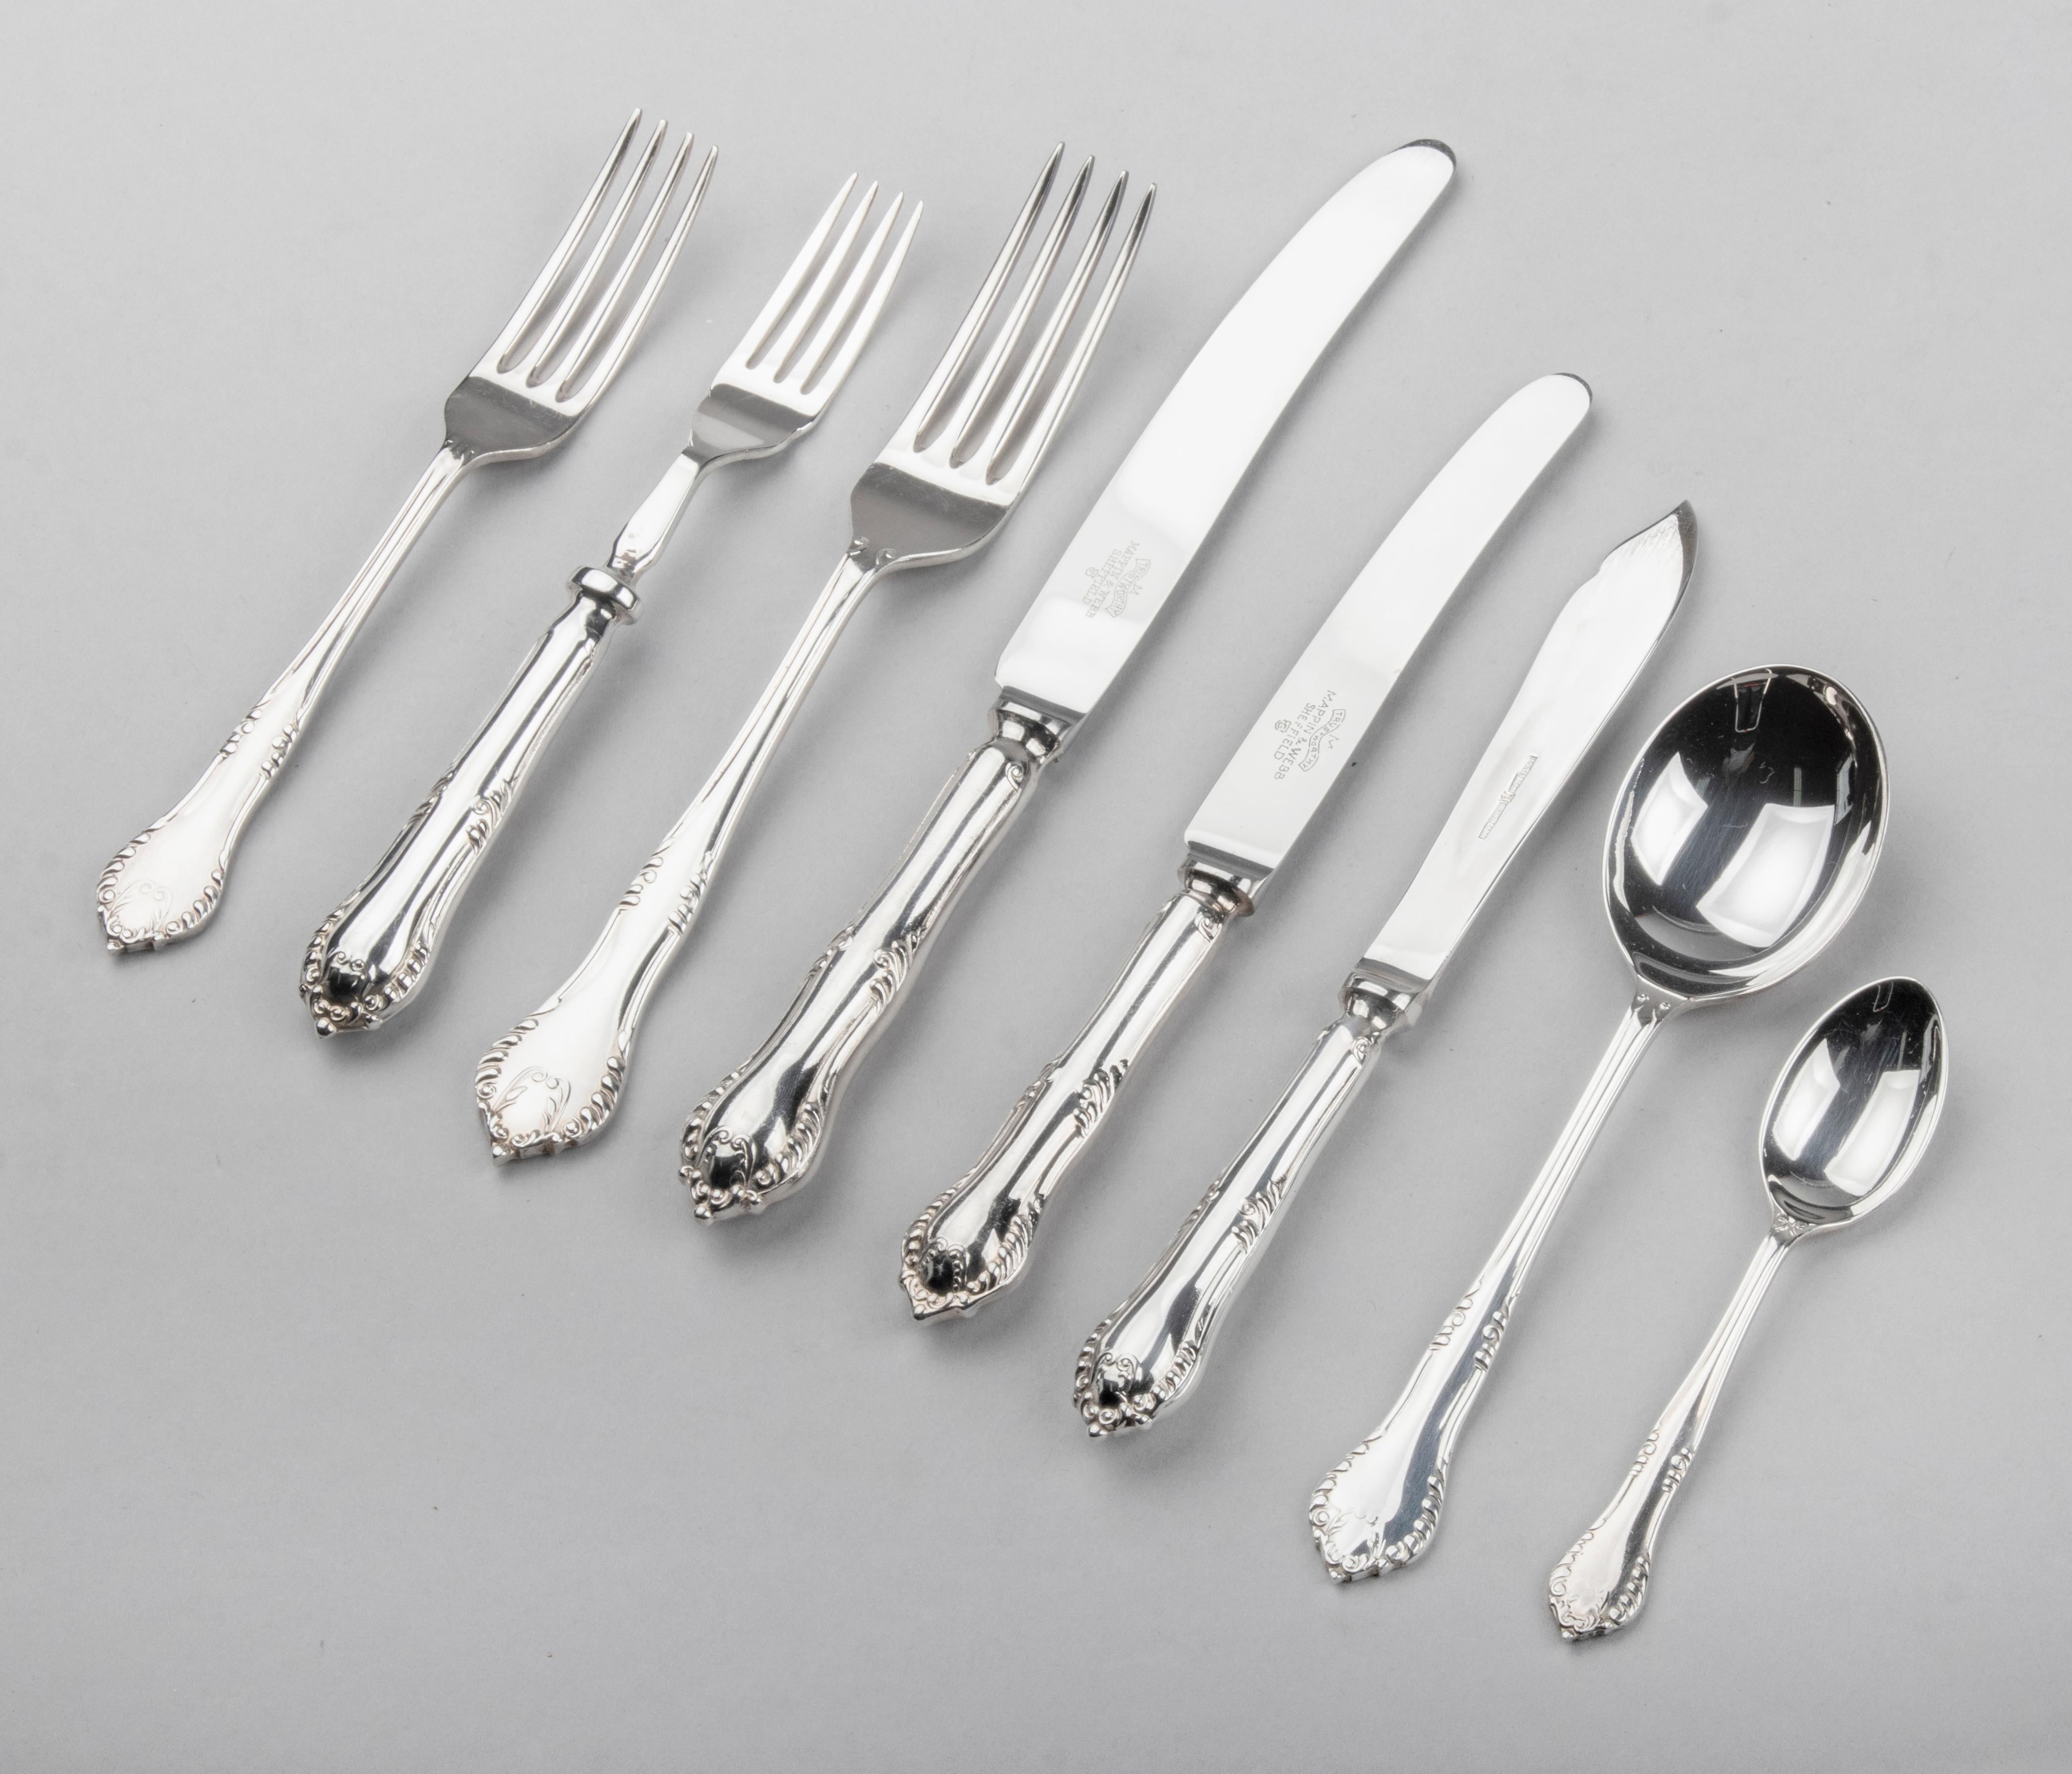 79-Piece Set of Silver Plated Flatware for 8 Persons by Mappin & Webb 7